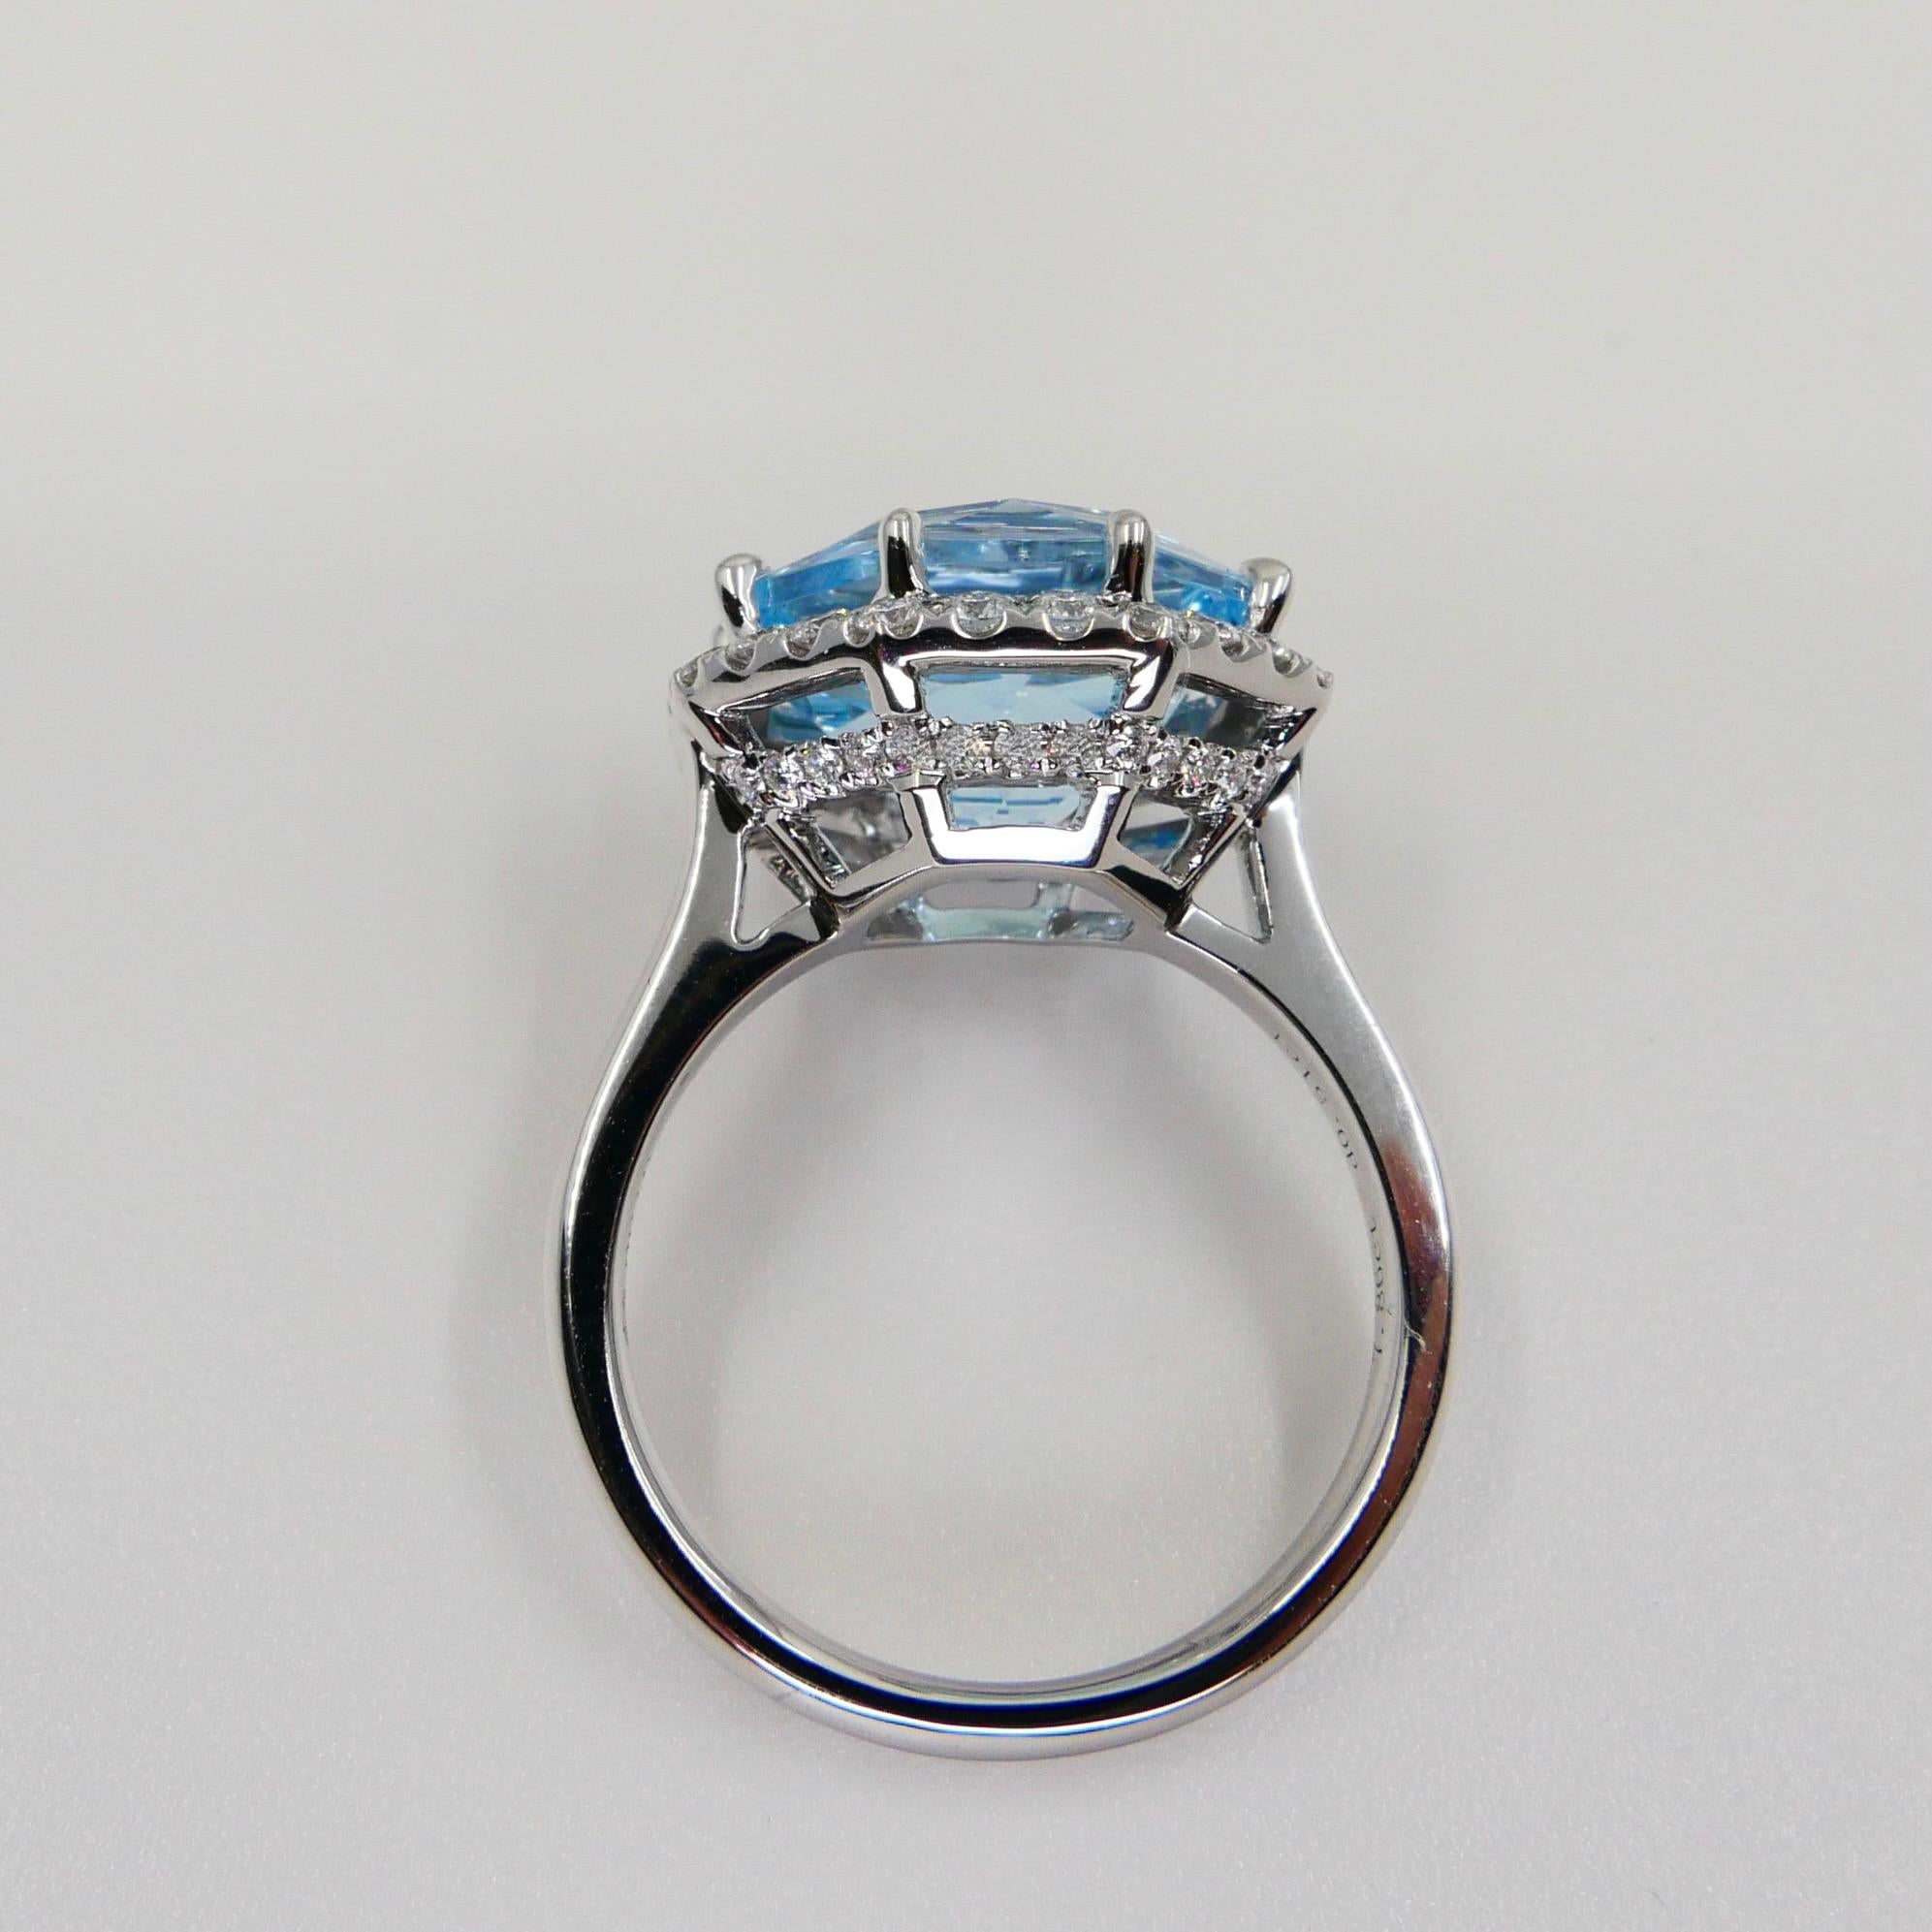 Flower Cut Powder Blue Topaz 7.86 Cts and Diamond Cocktail Ring, Statement Ring For Sale 5